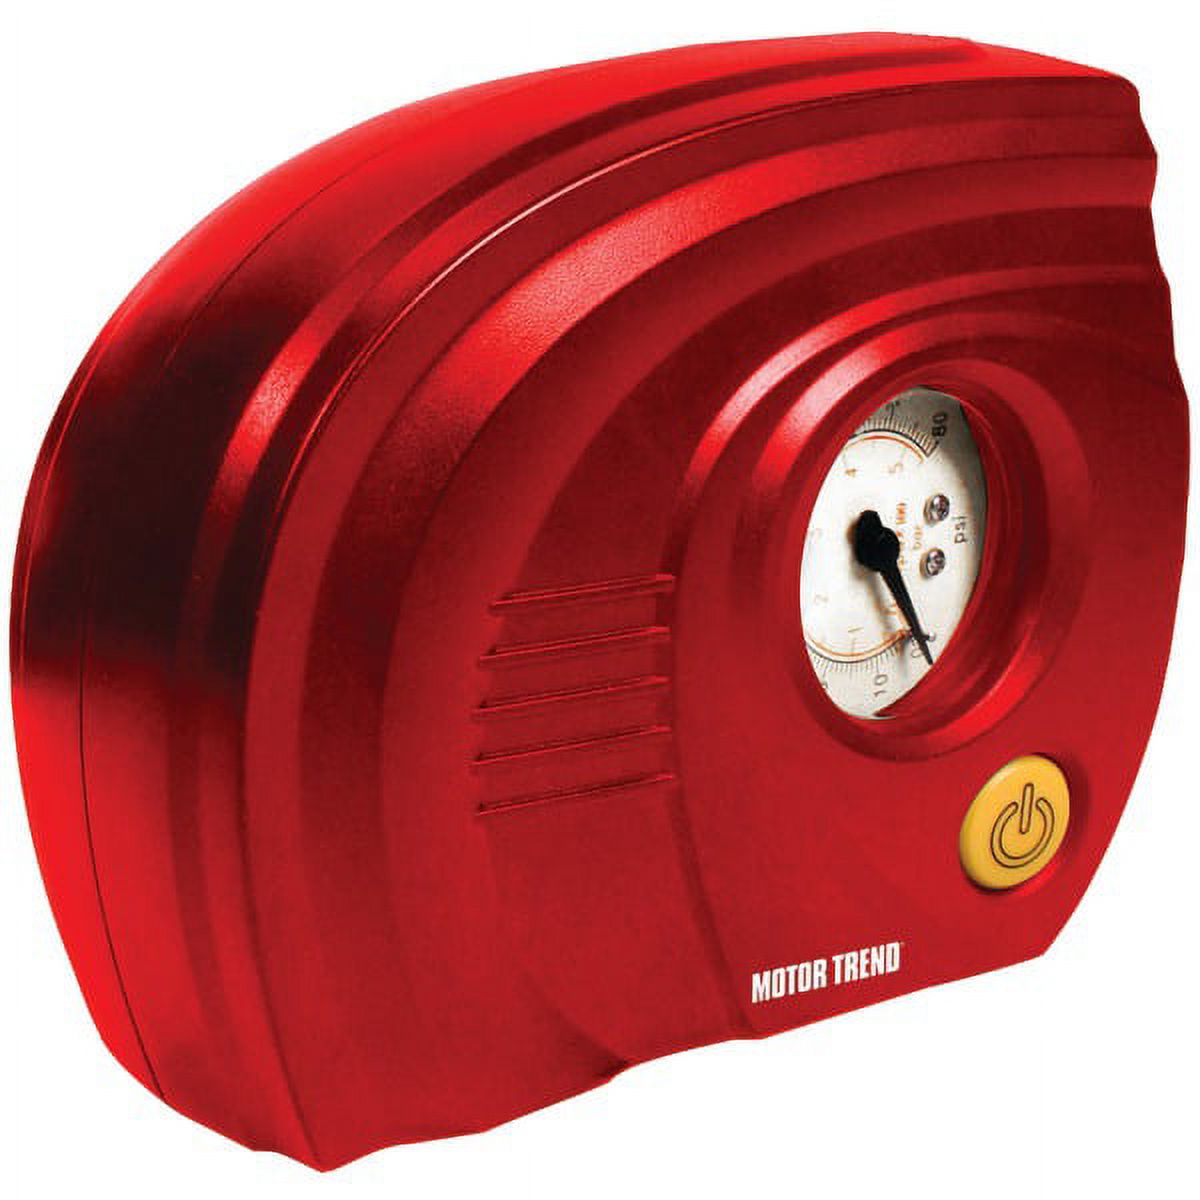 Motor Trend Cpm-0160 Compact Air Compressor - image 1 of 1